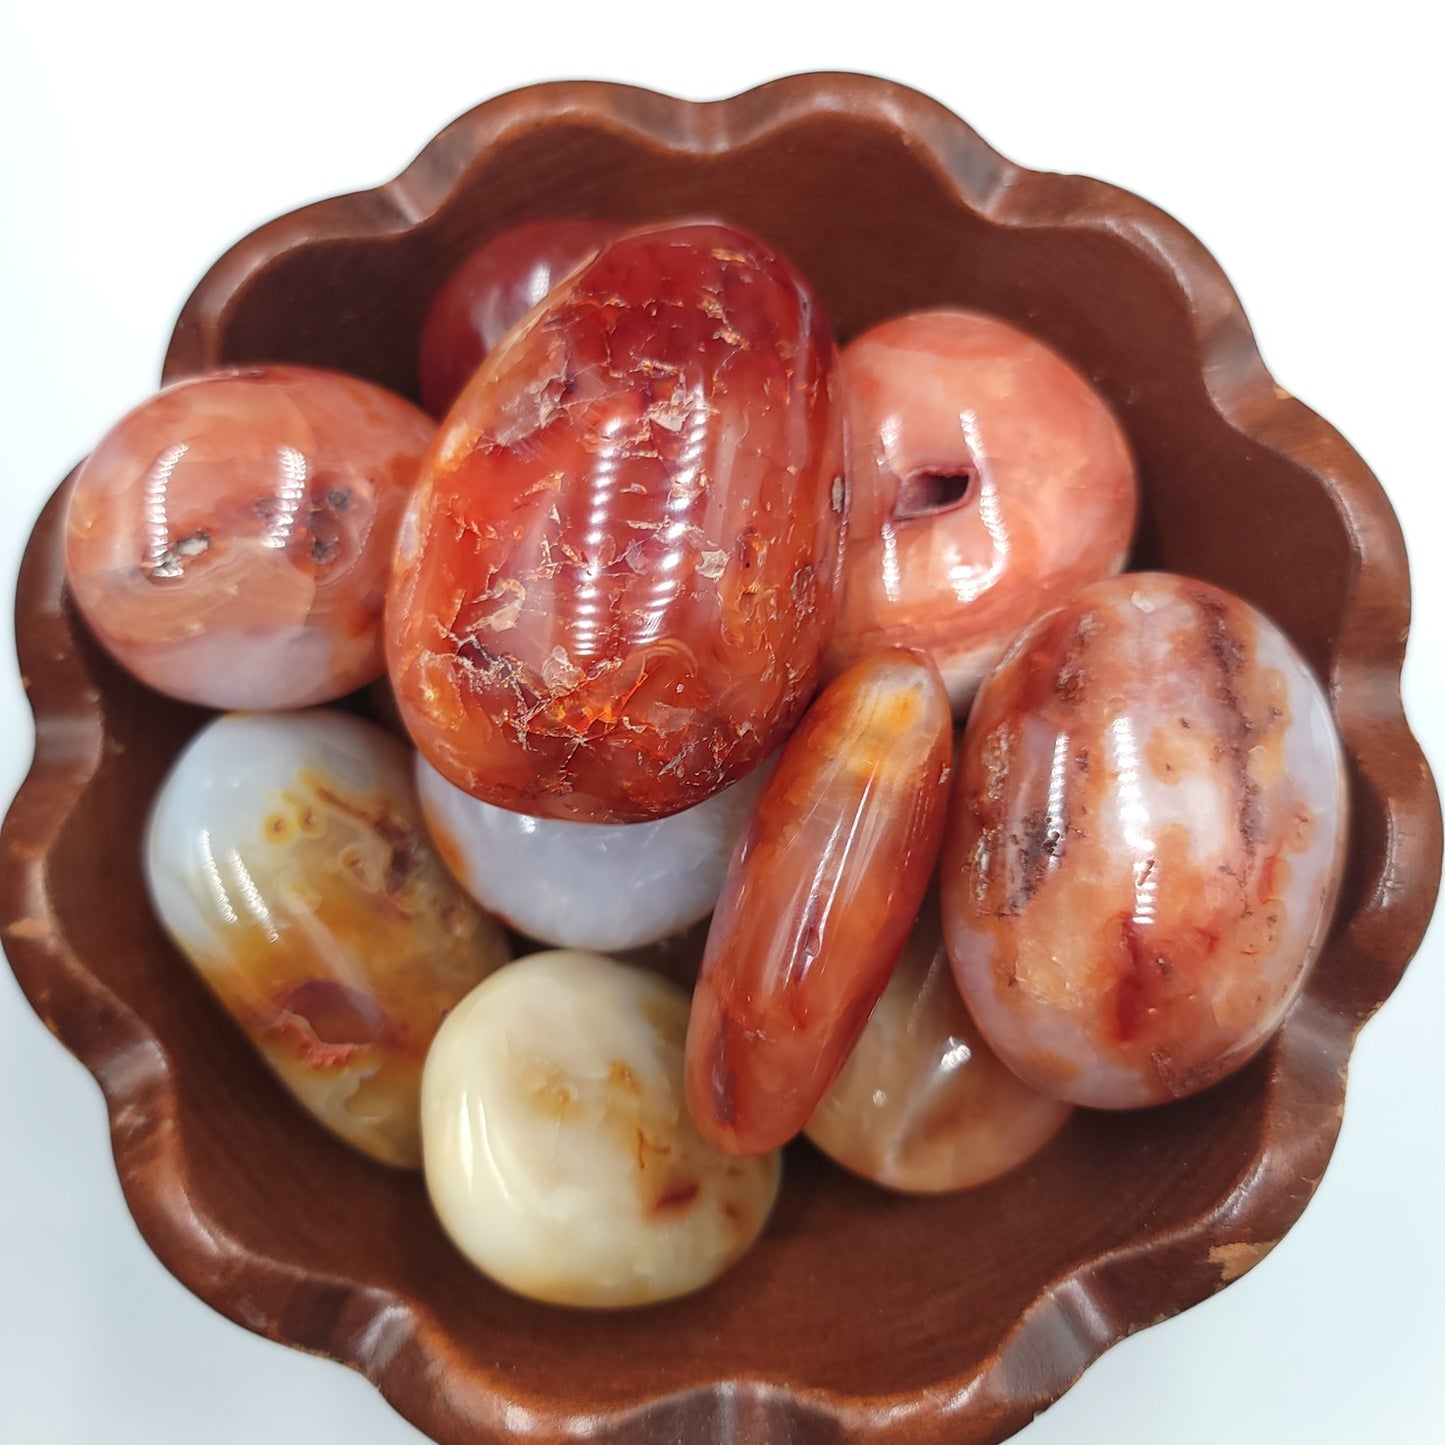 Carnelian Palm Stone Gallet - Elevated Metaphysical